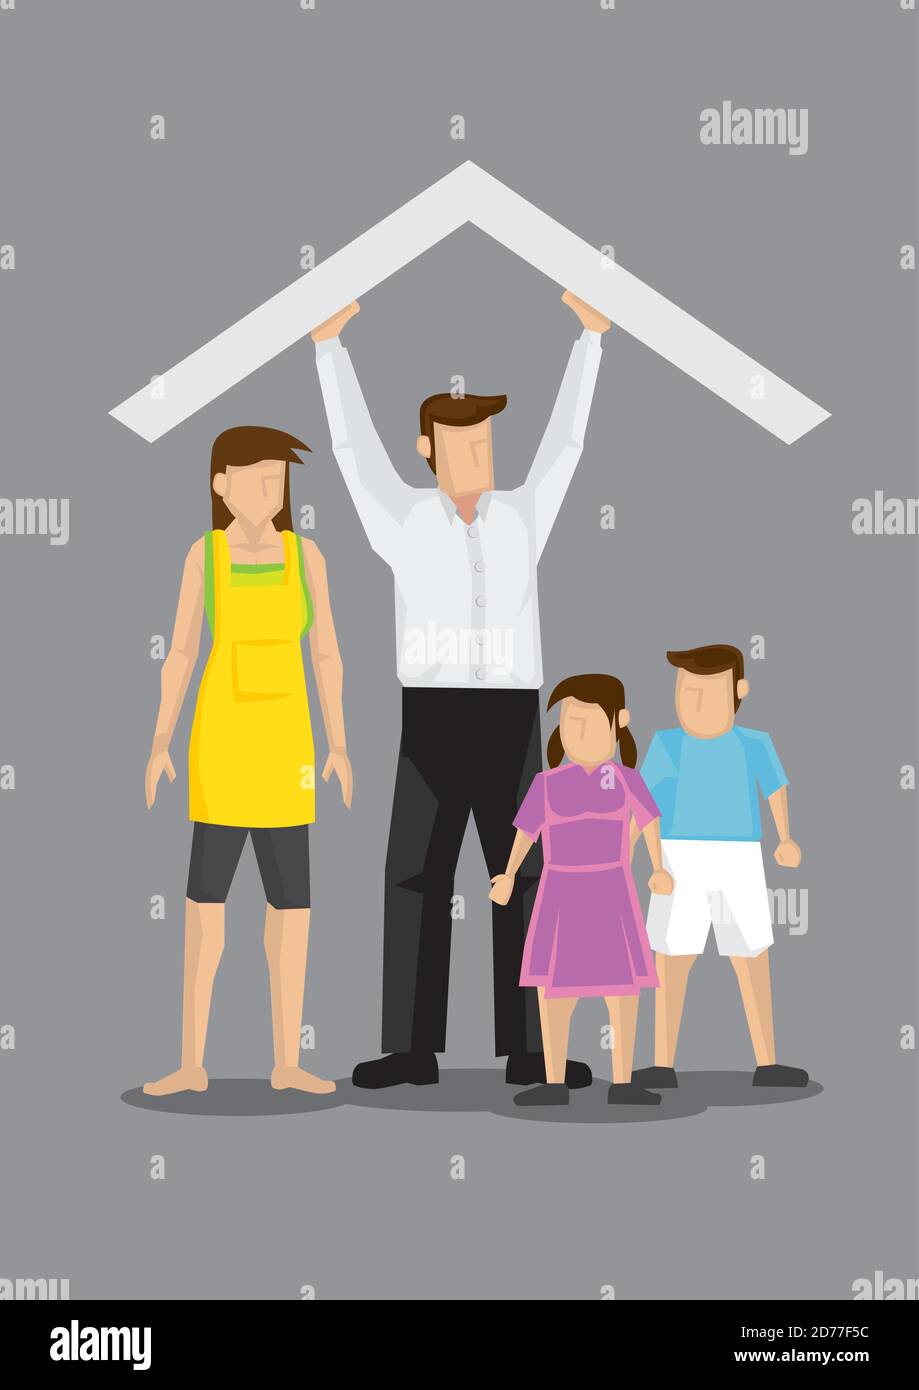 Cartoon man holding up a roof above his family with wife, son and daughter. Vector illustration of concept on man supporting family isolated on grey b Stock Vector